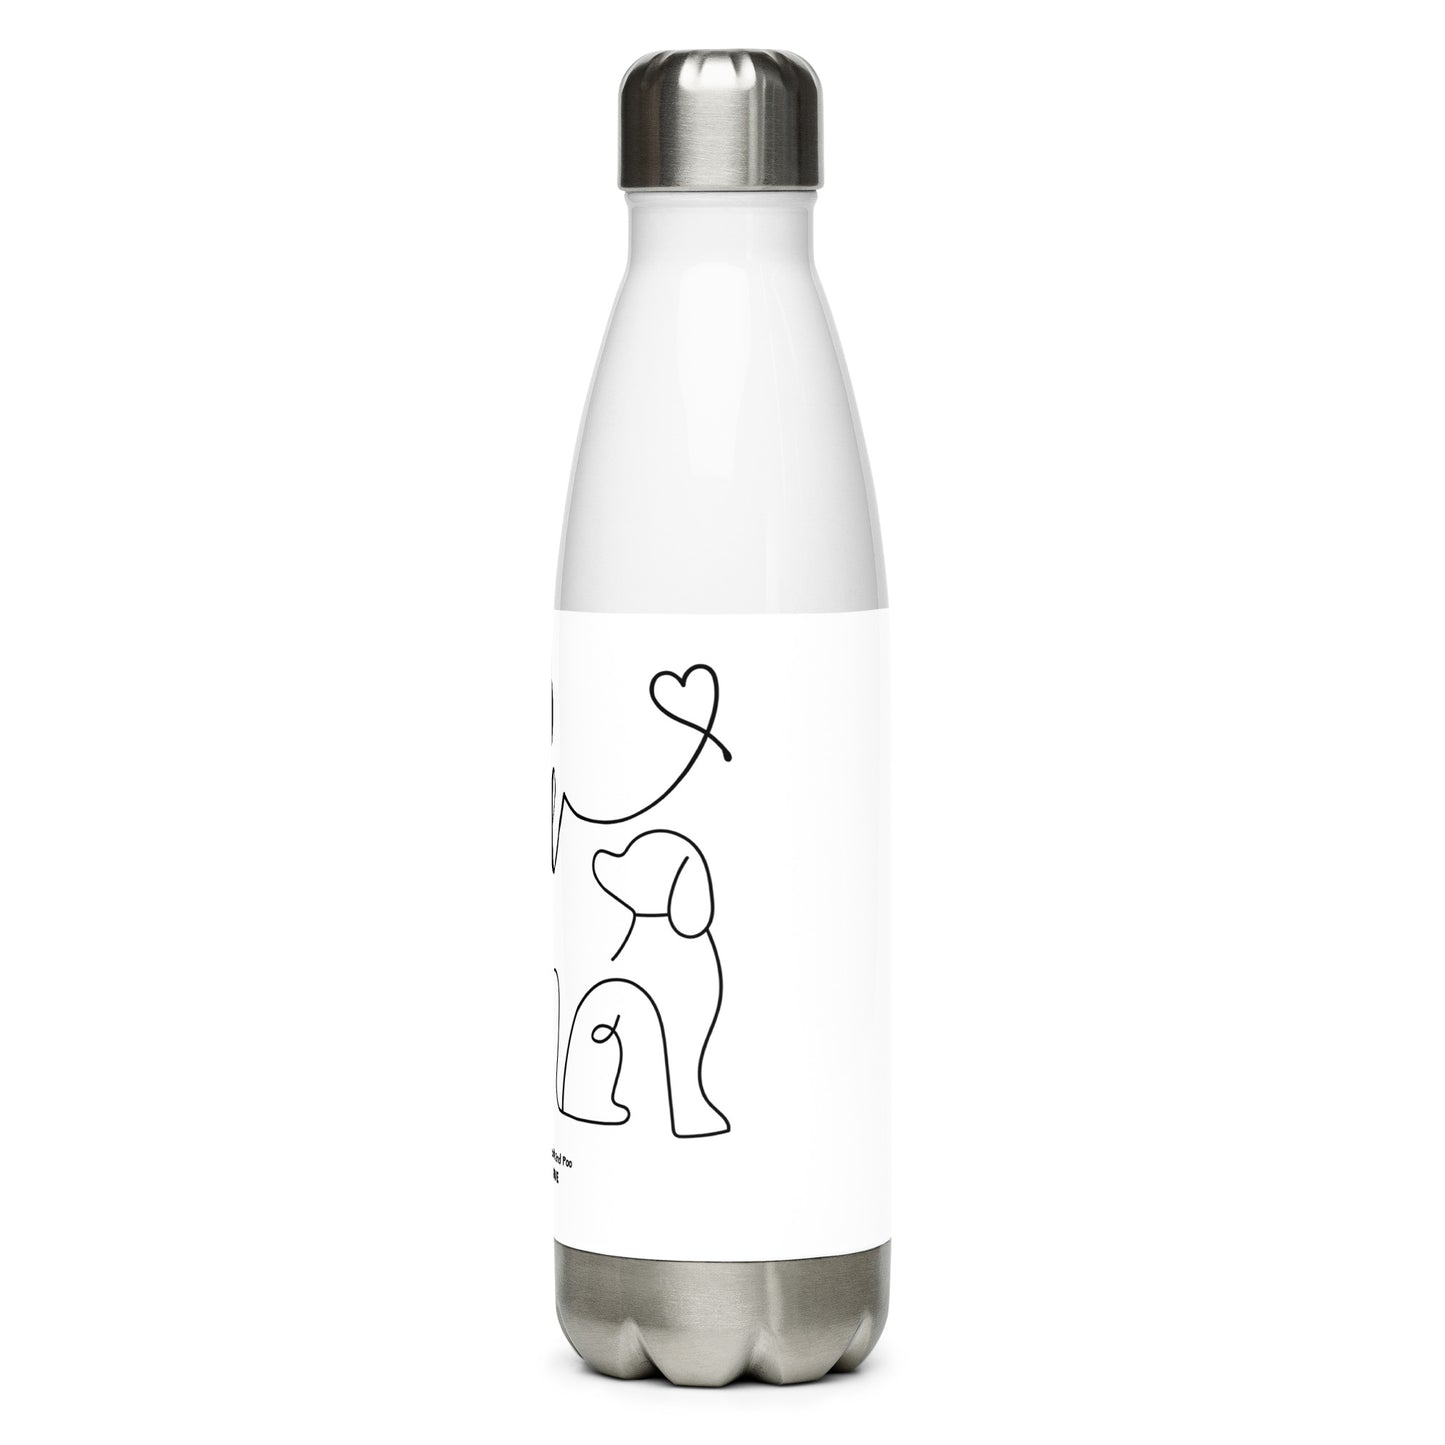 "Poo Love" Stainless steel water bottle - white